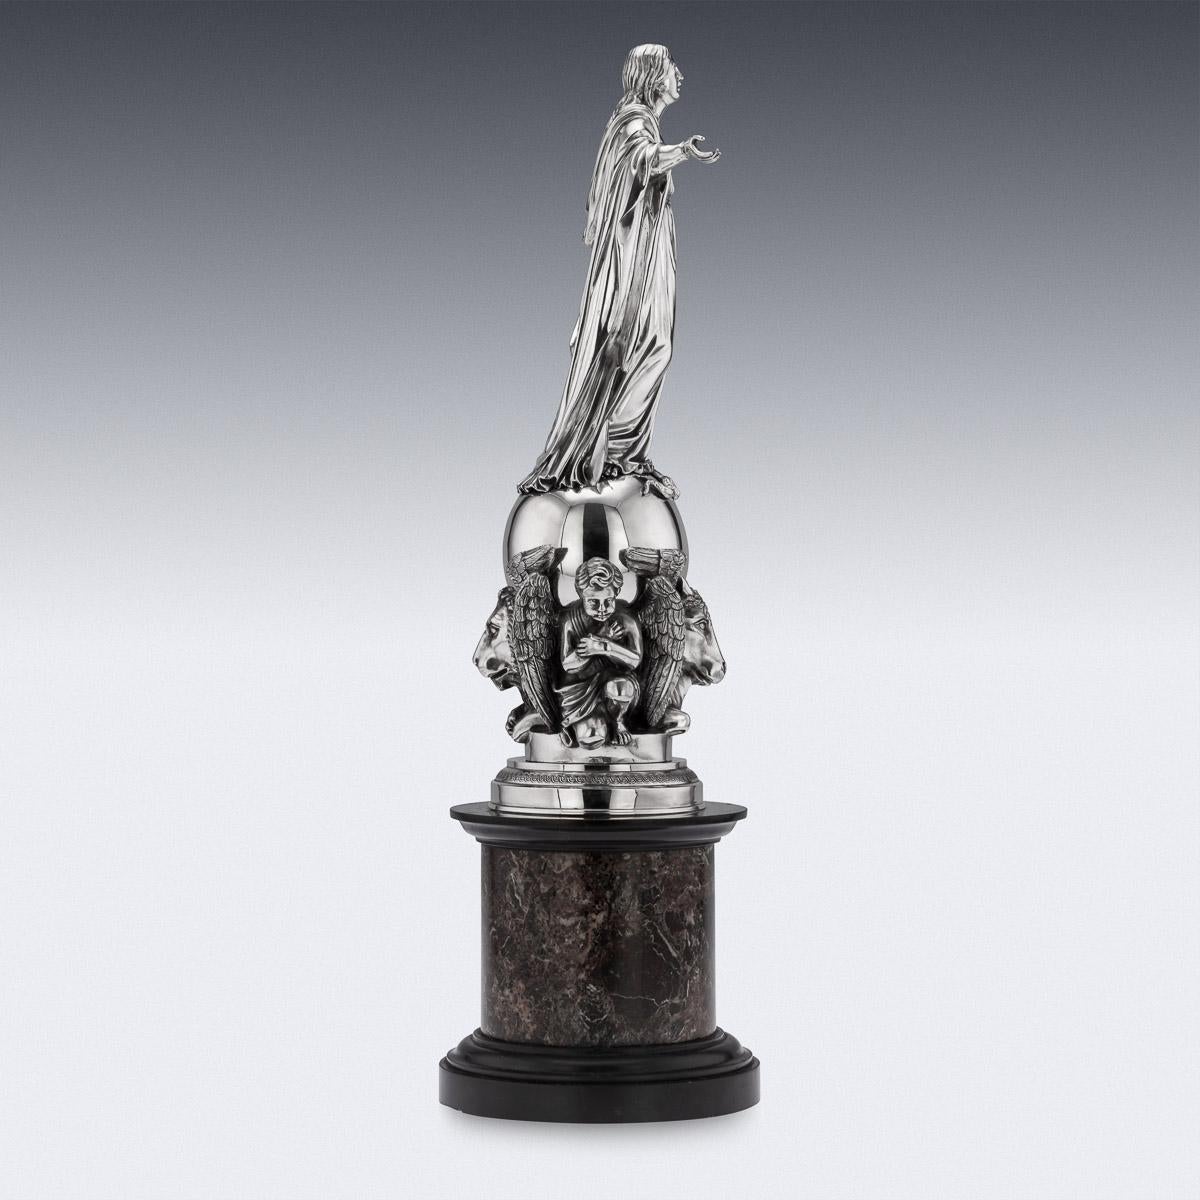 Antique 19th Century French Monumental Solid Silver Figural Centrepiece, c. 1880 For Sale 2